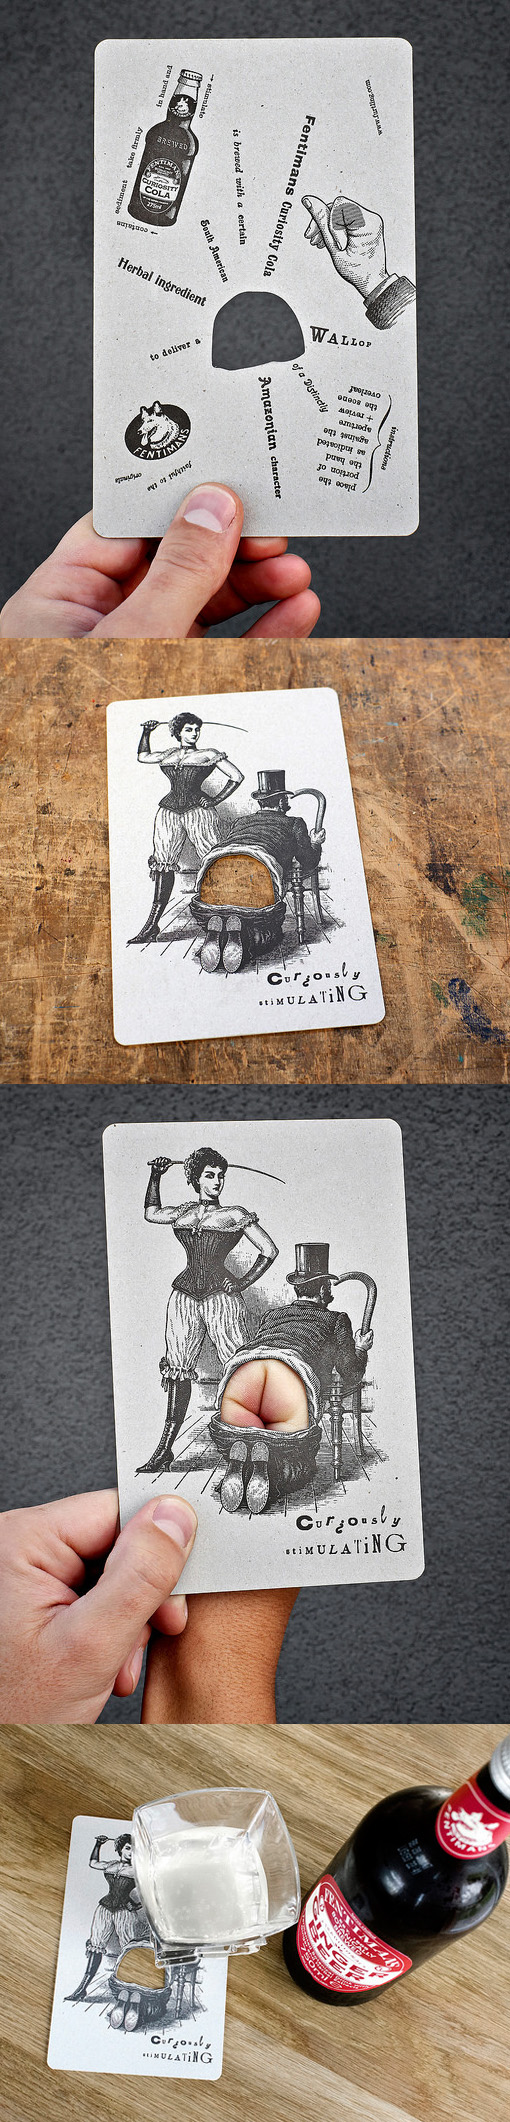 Hilariously Interactive Vintage Style Letterpress Beer Coaster Business Card